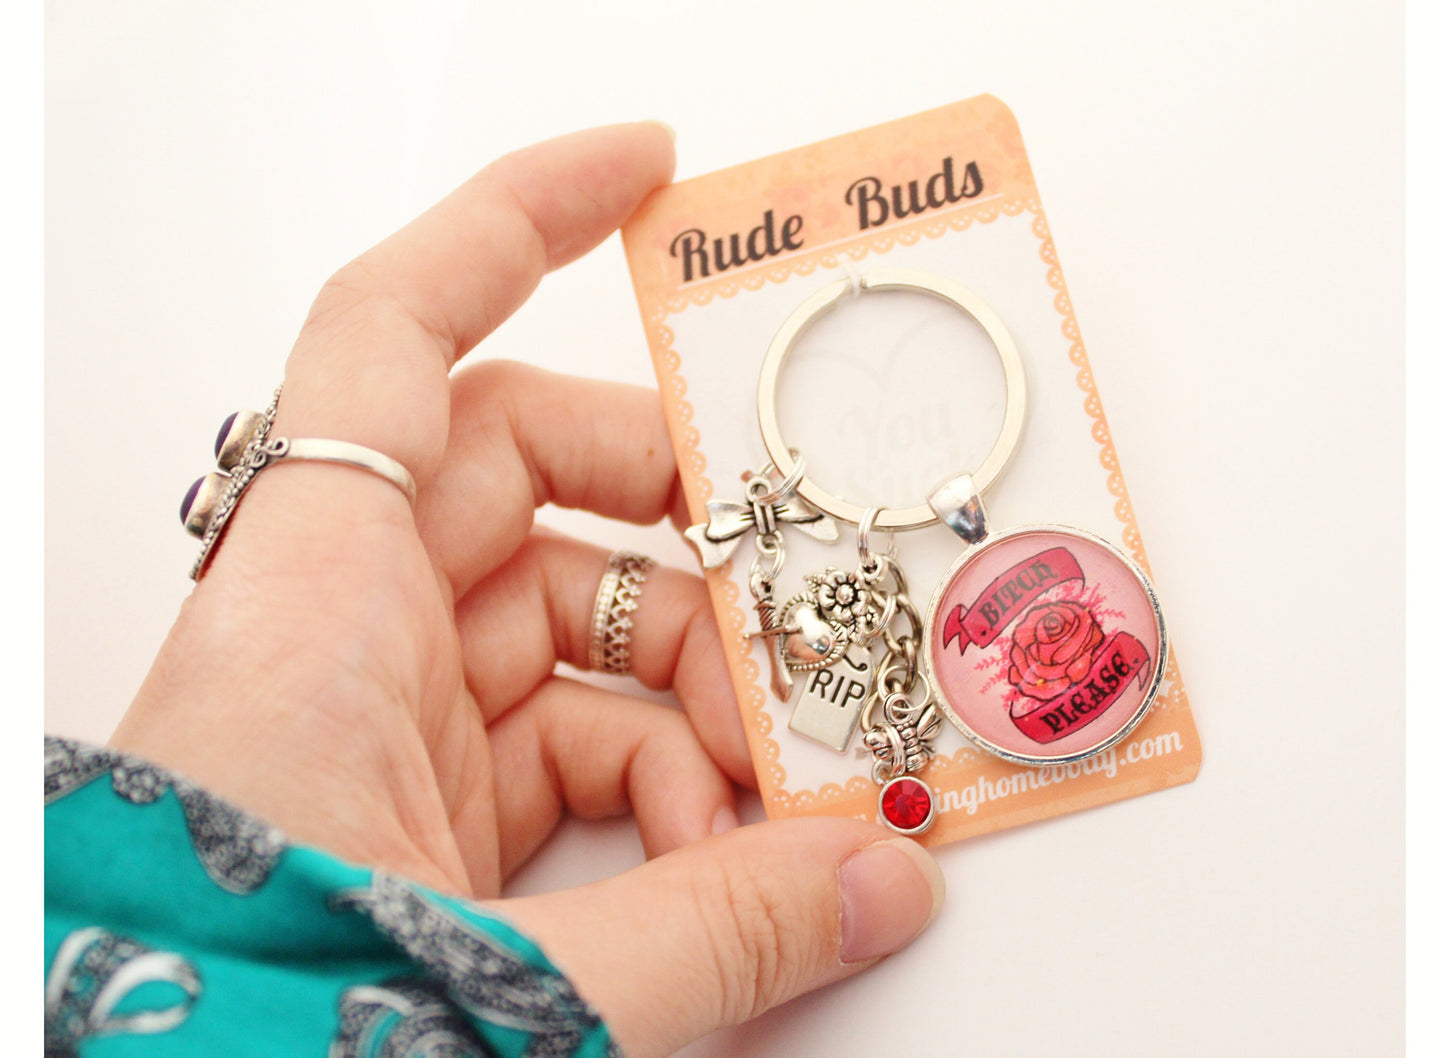 Bitch Please Rude Buds Key Chain. Pastel Flower Keychains for Women. Sarcastic Keychain Accessories. Bachelorette Party Gift for her.